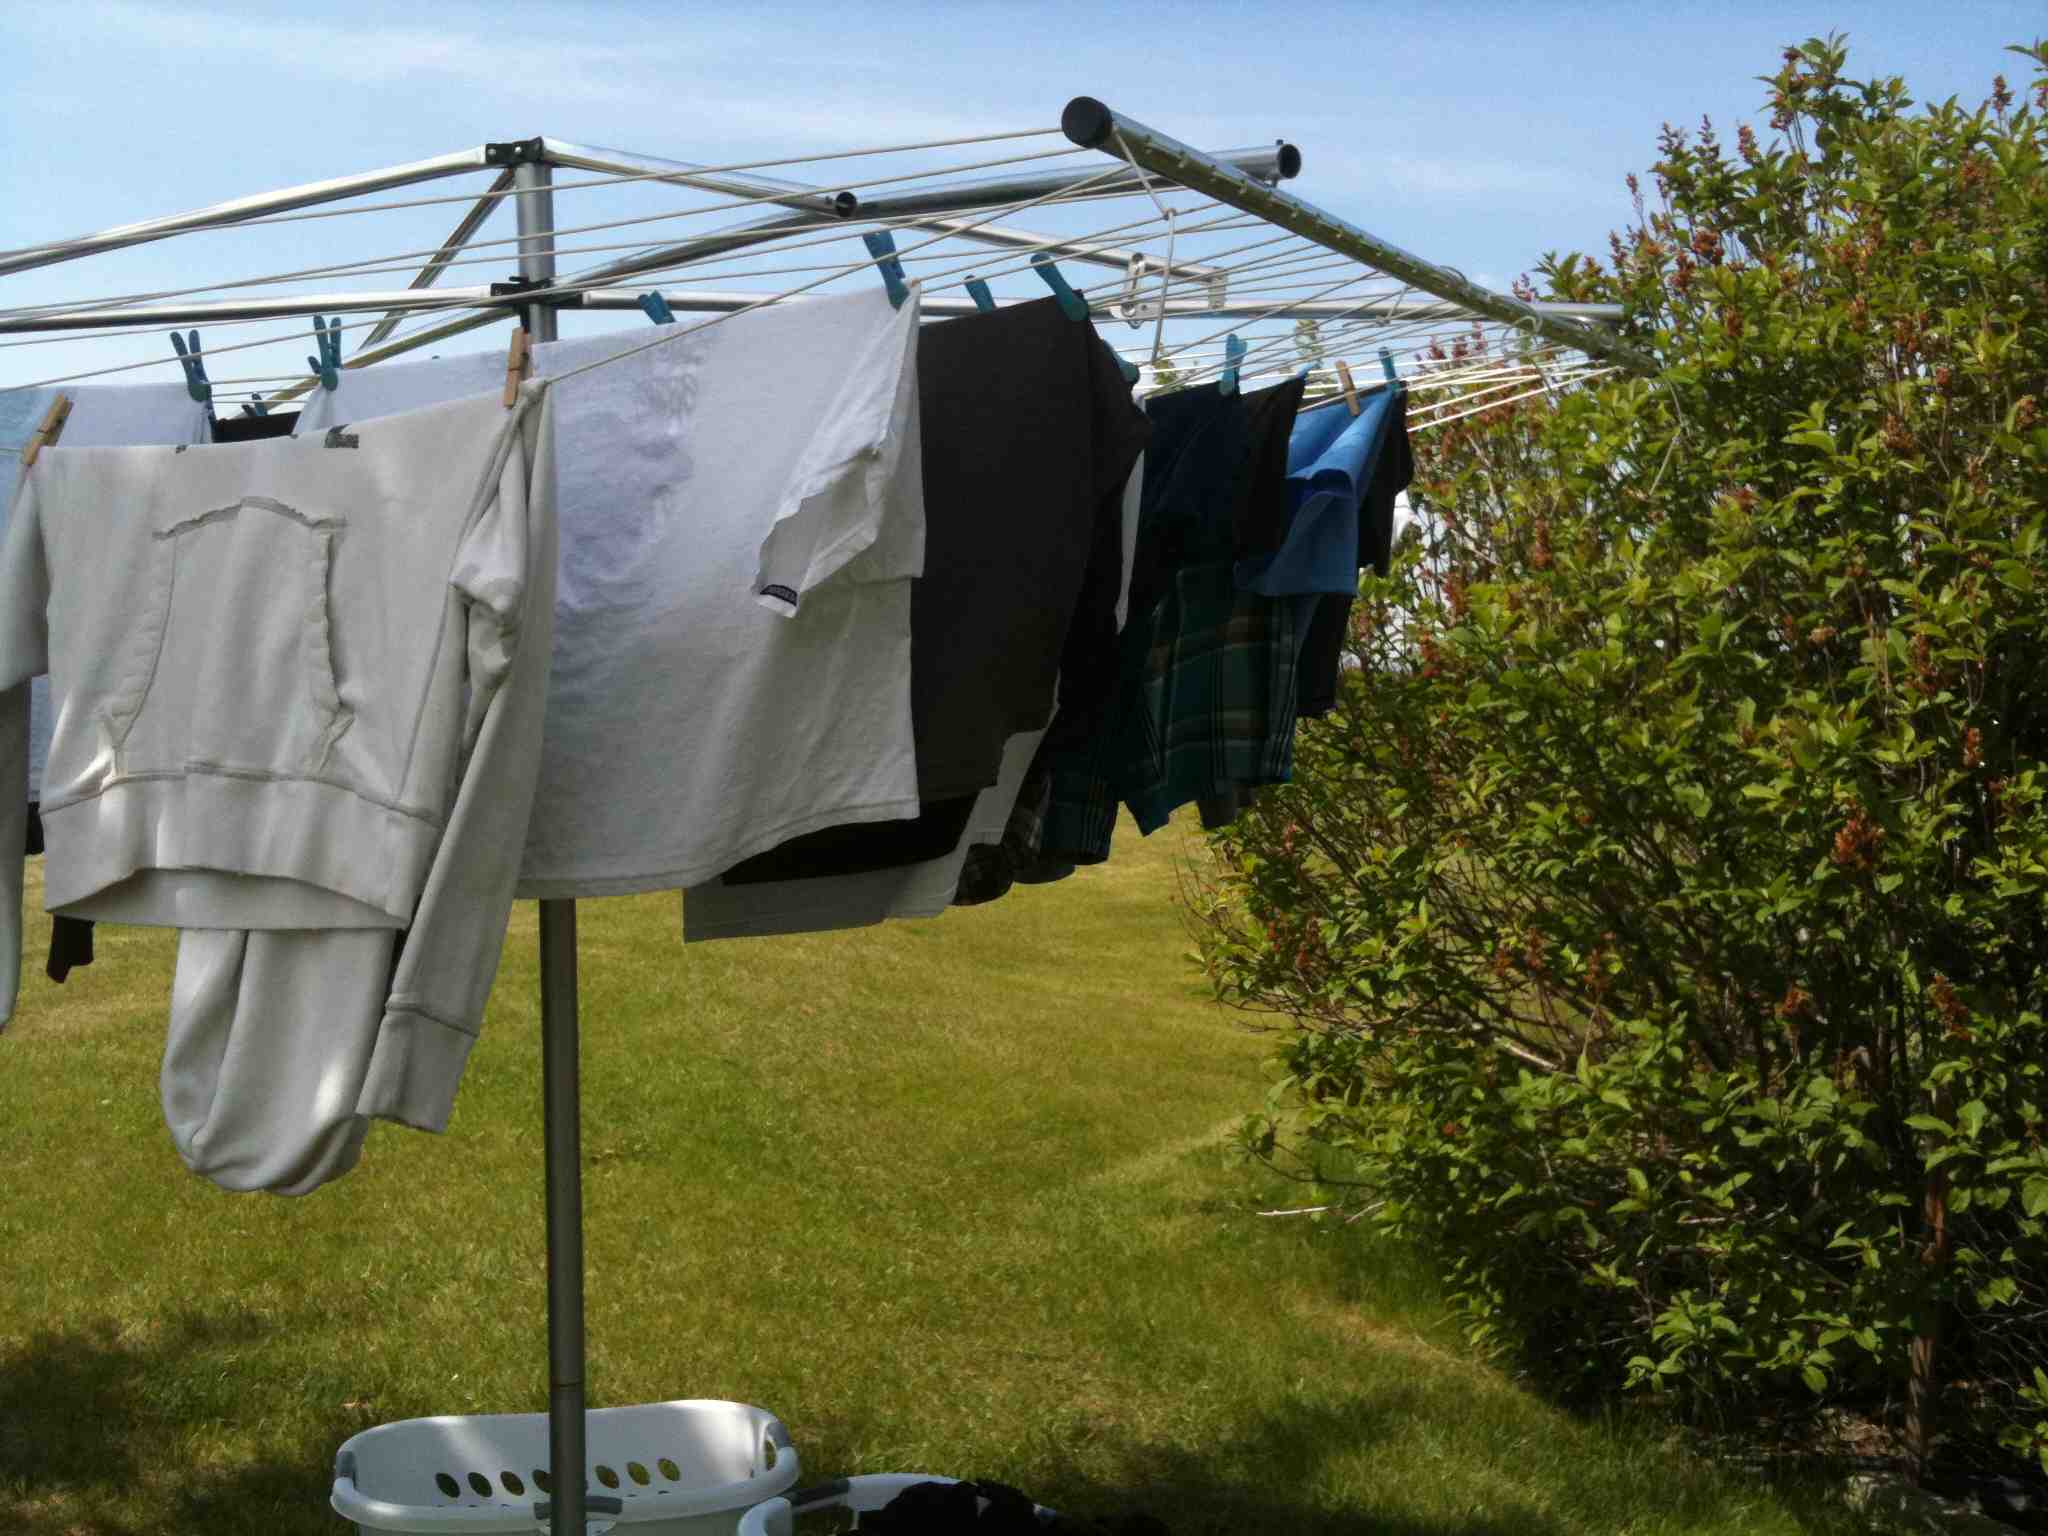 Are Laundry Lines Good Feng Shui? - Living Feng Shui